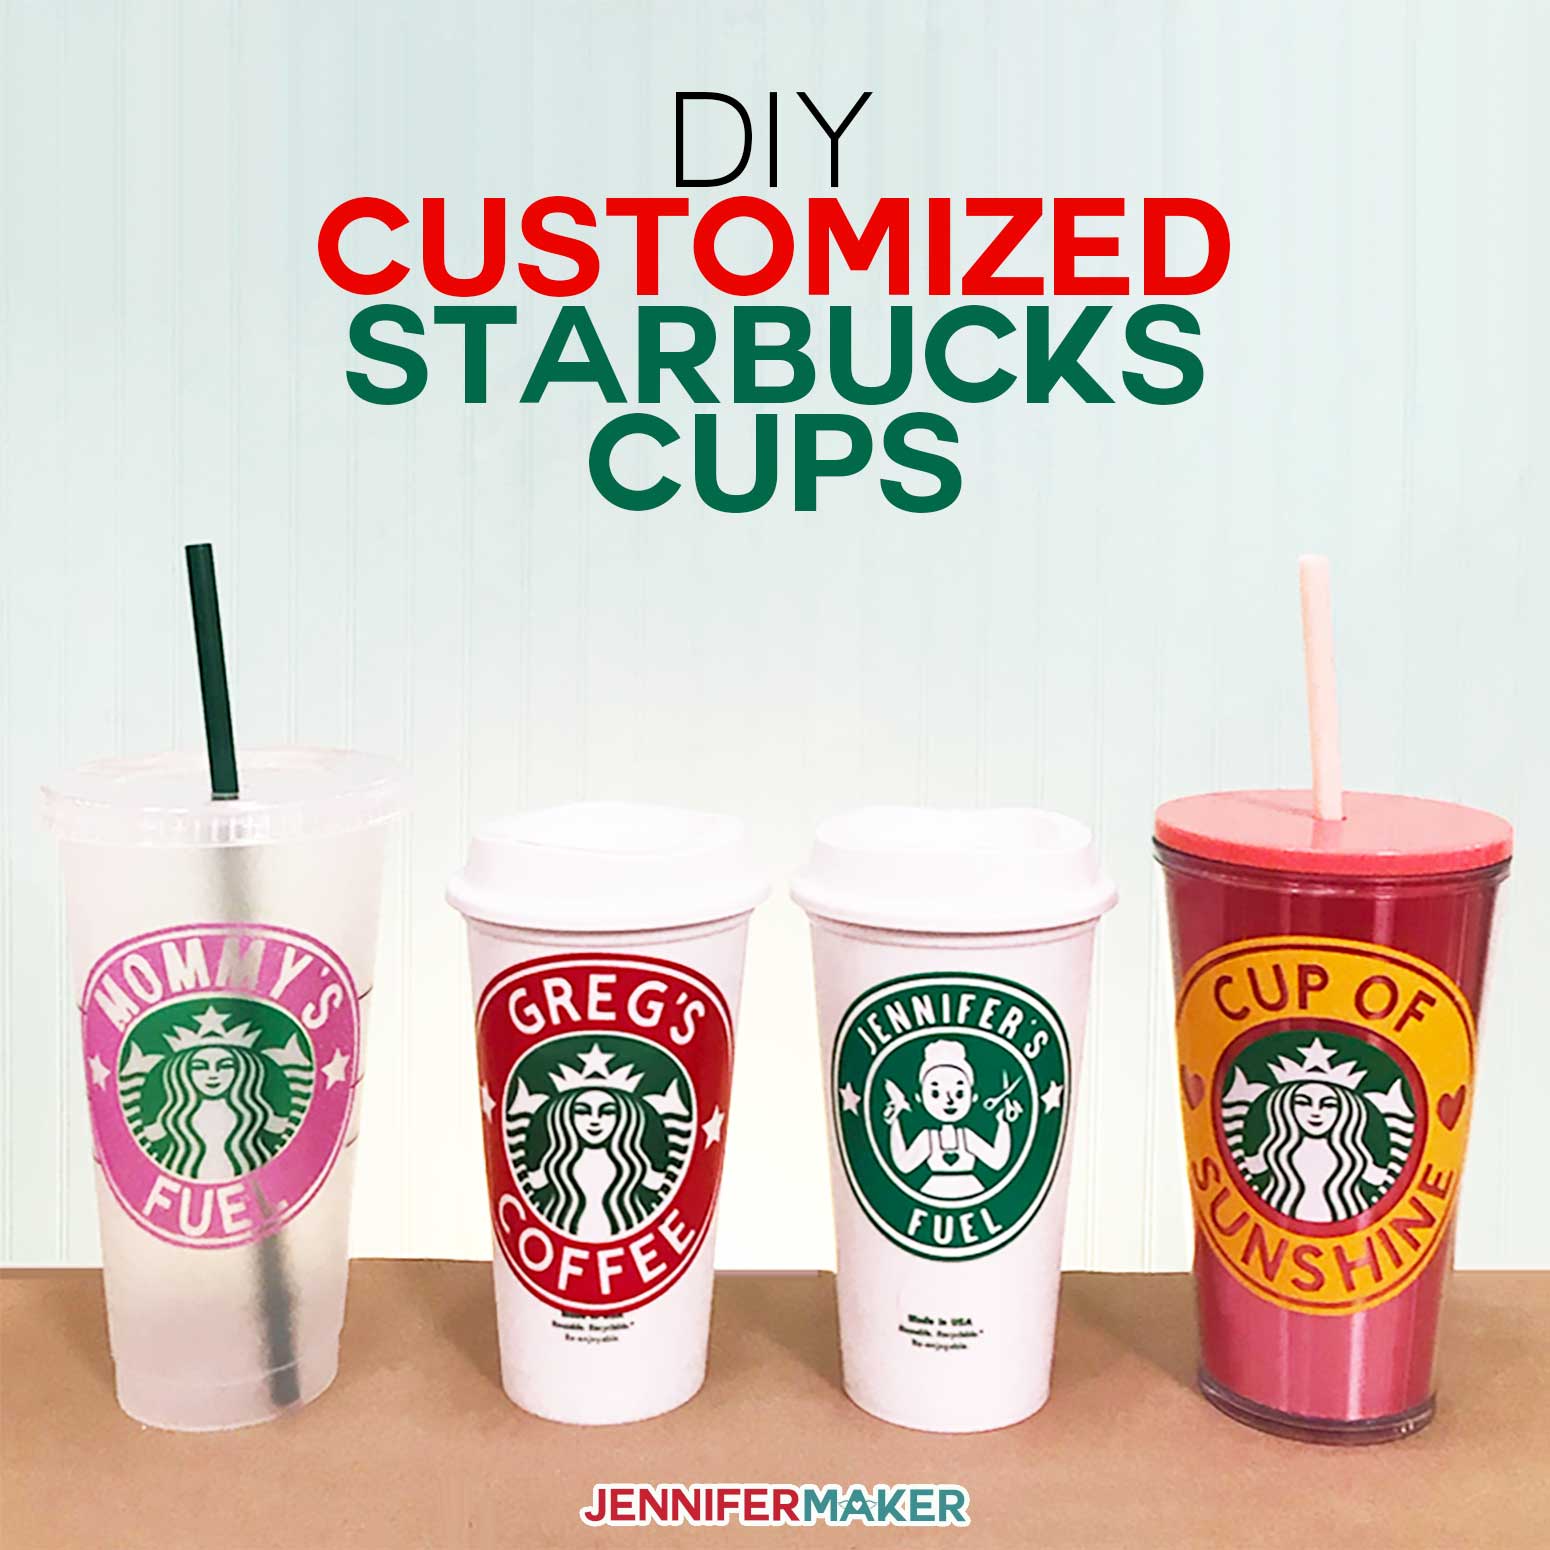 DIY Customized Starbucks Cups – Personalize With a Name!